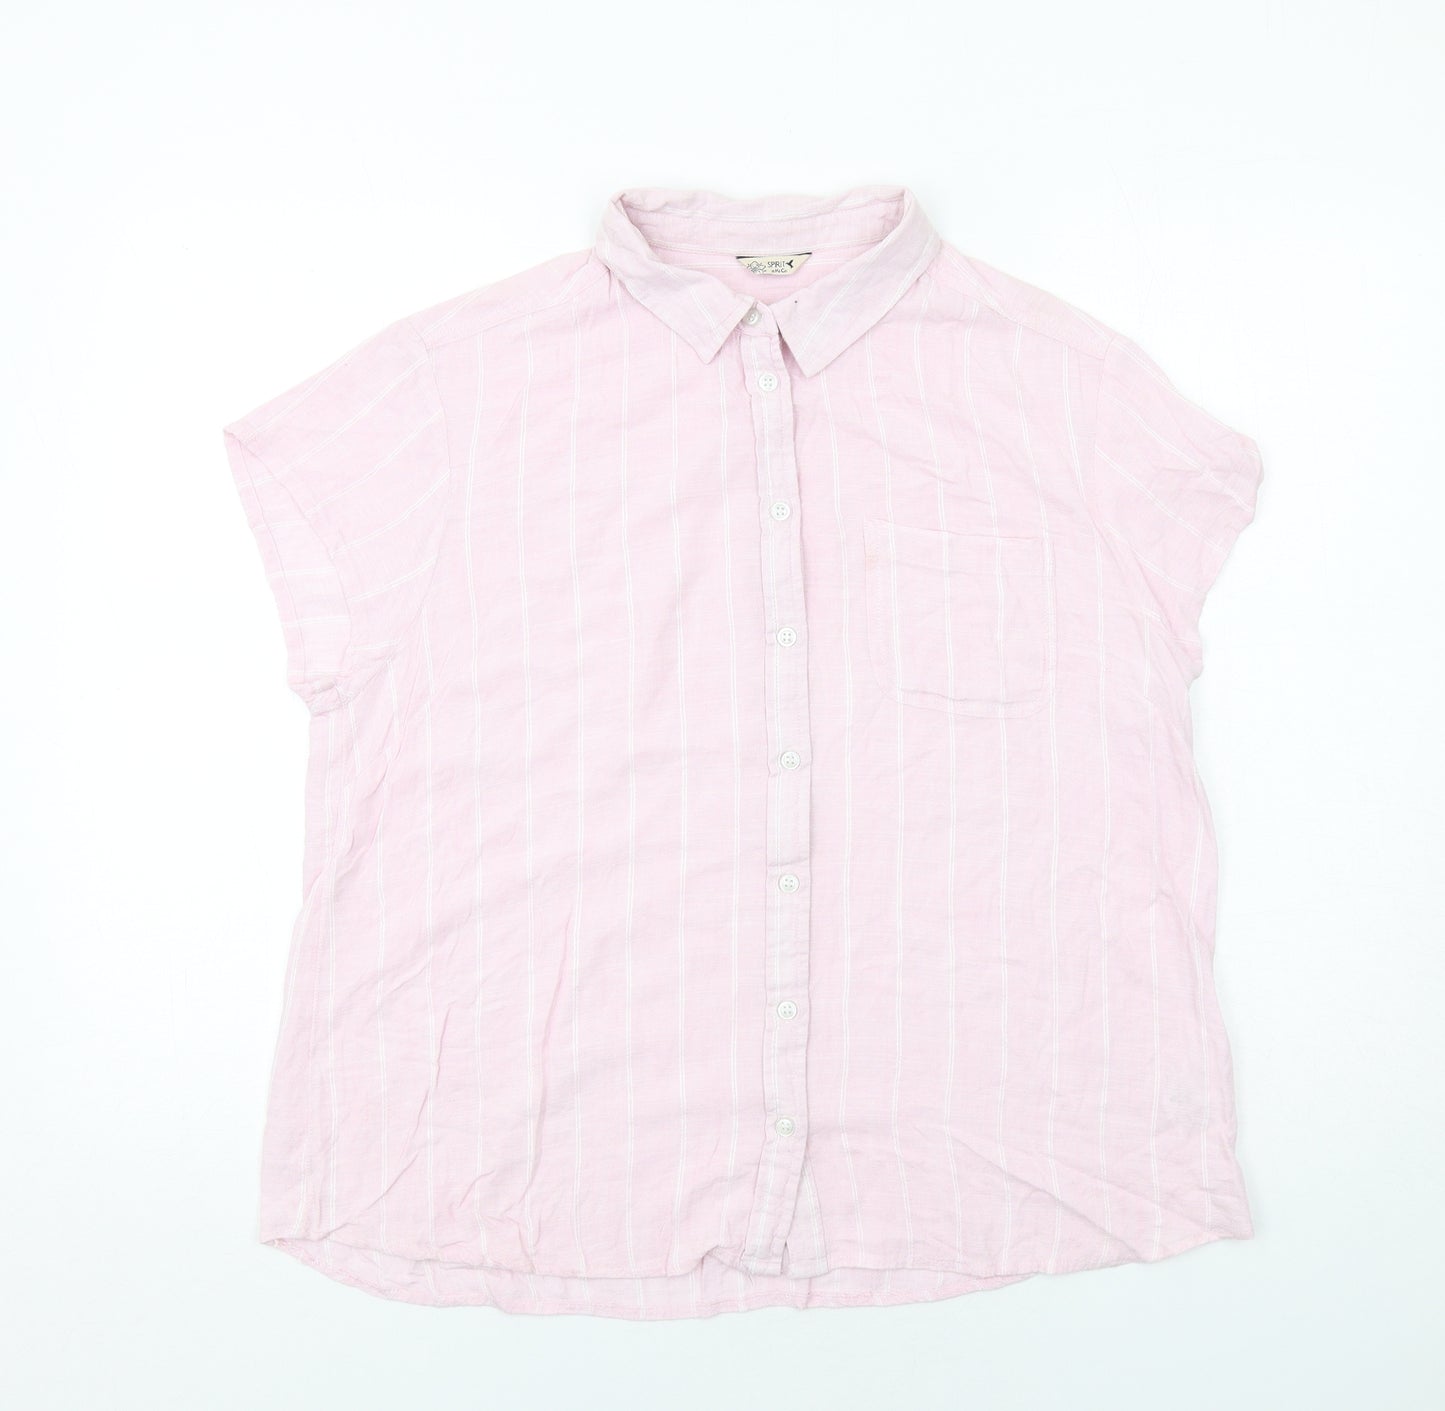 M&Co Womens Pink Striped Viscose Basic Button-Up Size 14 Collared